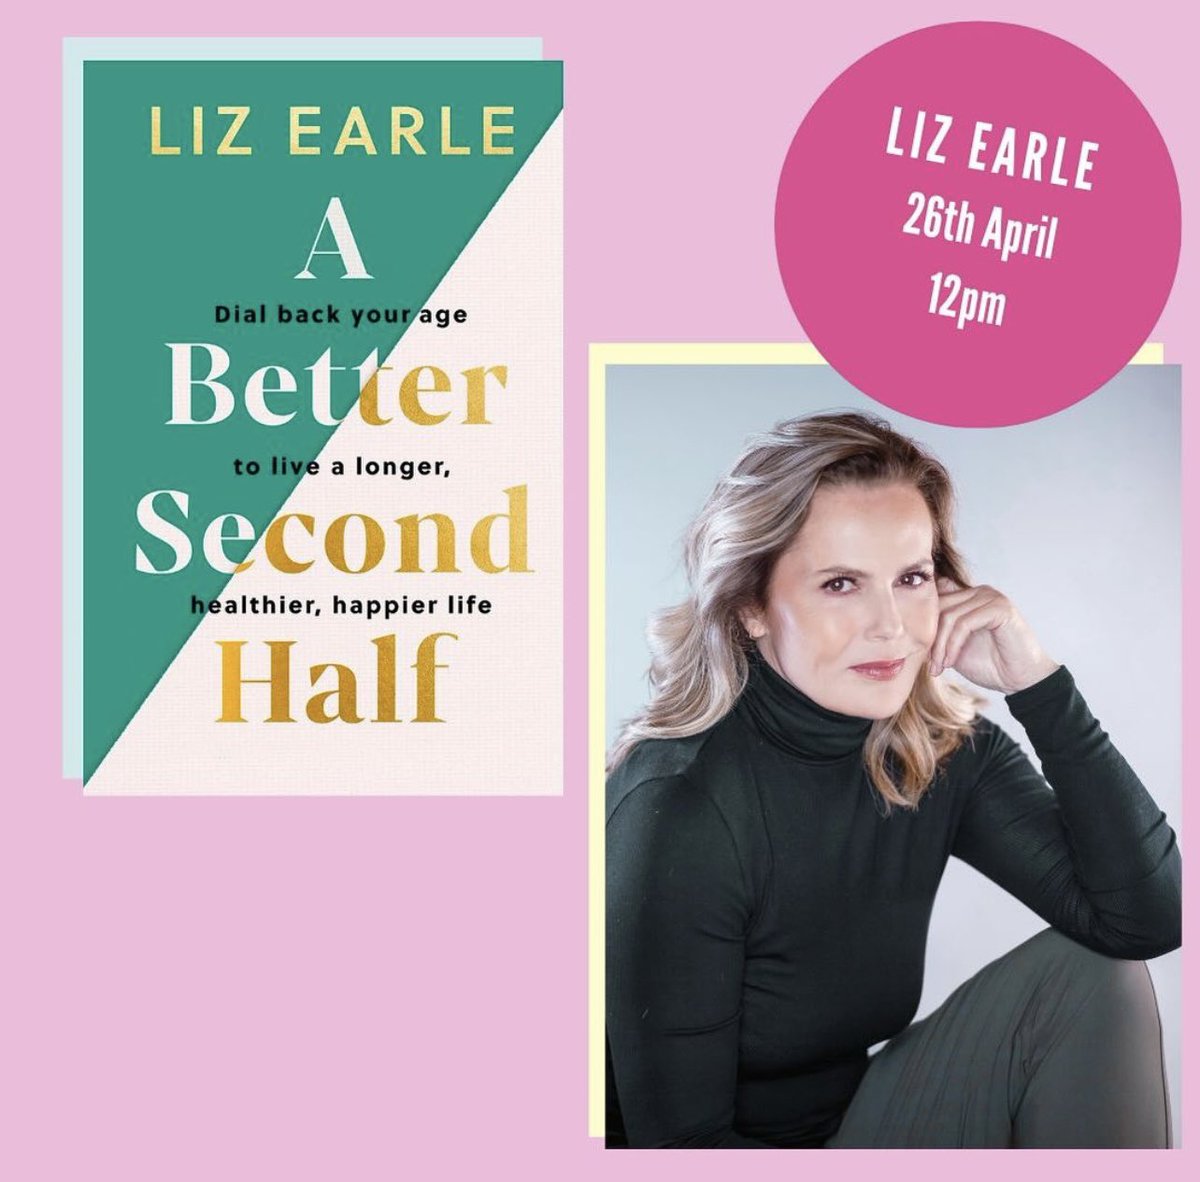 @HenleyLitFest pop up with @LizEarleMe MBE. One hour. One word to describe her ‘IMPRESSIVE’. The book 📕 published yesterday an immediate best seller. BUT let me point out her references are 30 pages long of cited journals and papers. A crusader. #Chapeau